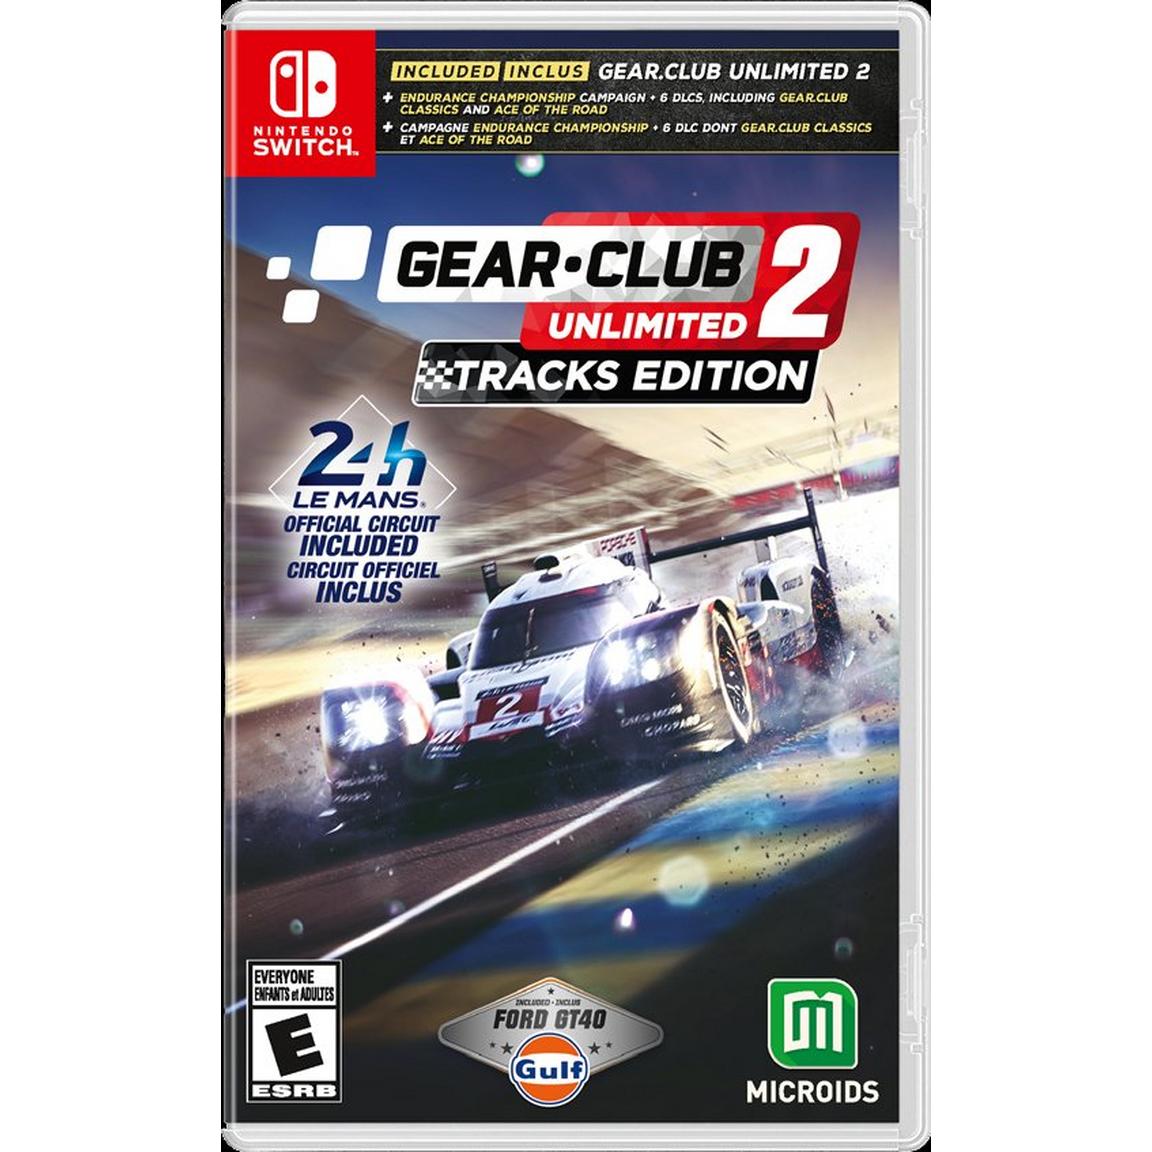 Gear.Club Unlimited 2 Tracks Edition - Nintendo Switch, Pre-Owned